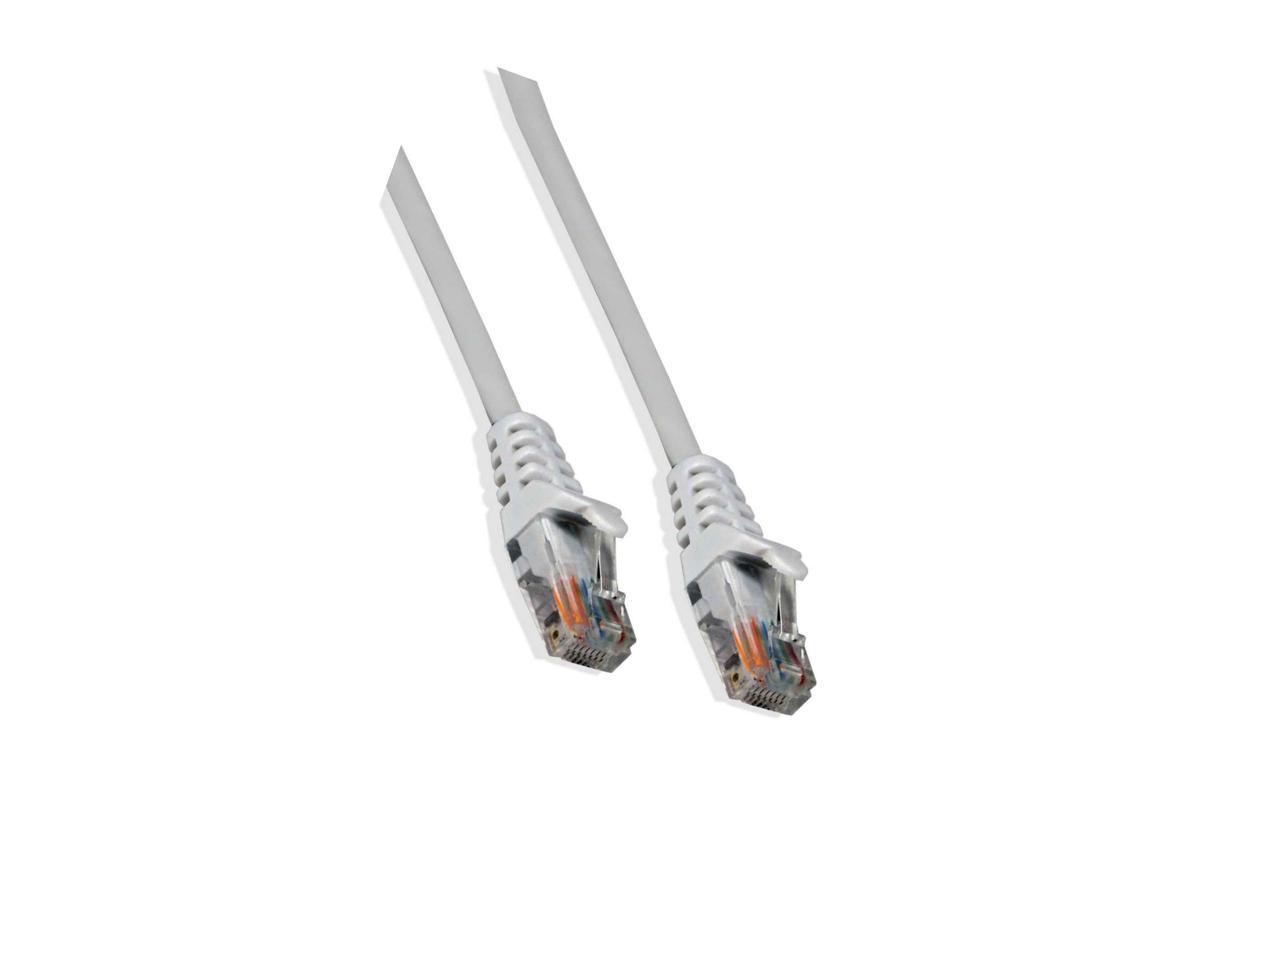 5 Pack LOGICO 2Ft Cat5e Ethernet RJ45 LAN Wire Network White UTP 2 Feet Patch Cable